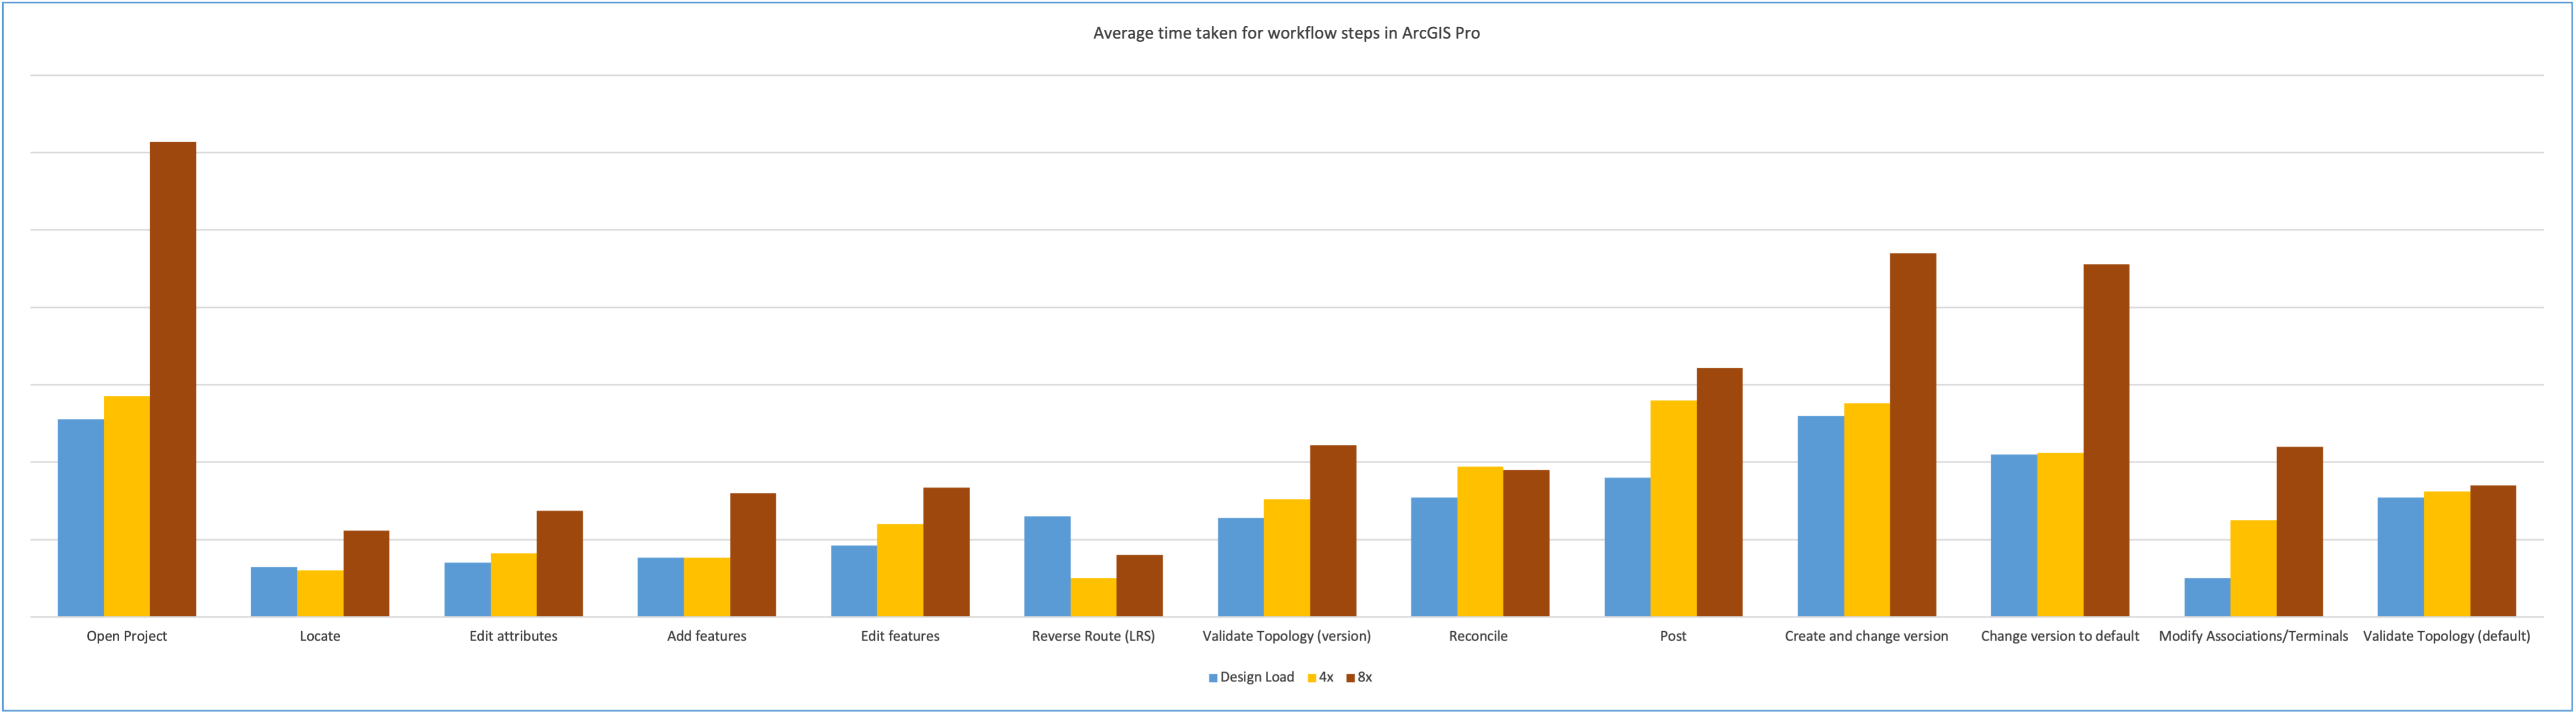 Conducted workflow step times in ArcGIS Pro across each tested design load scenario